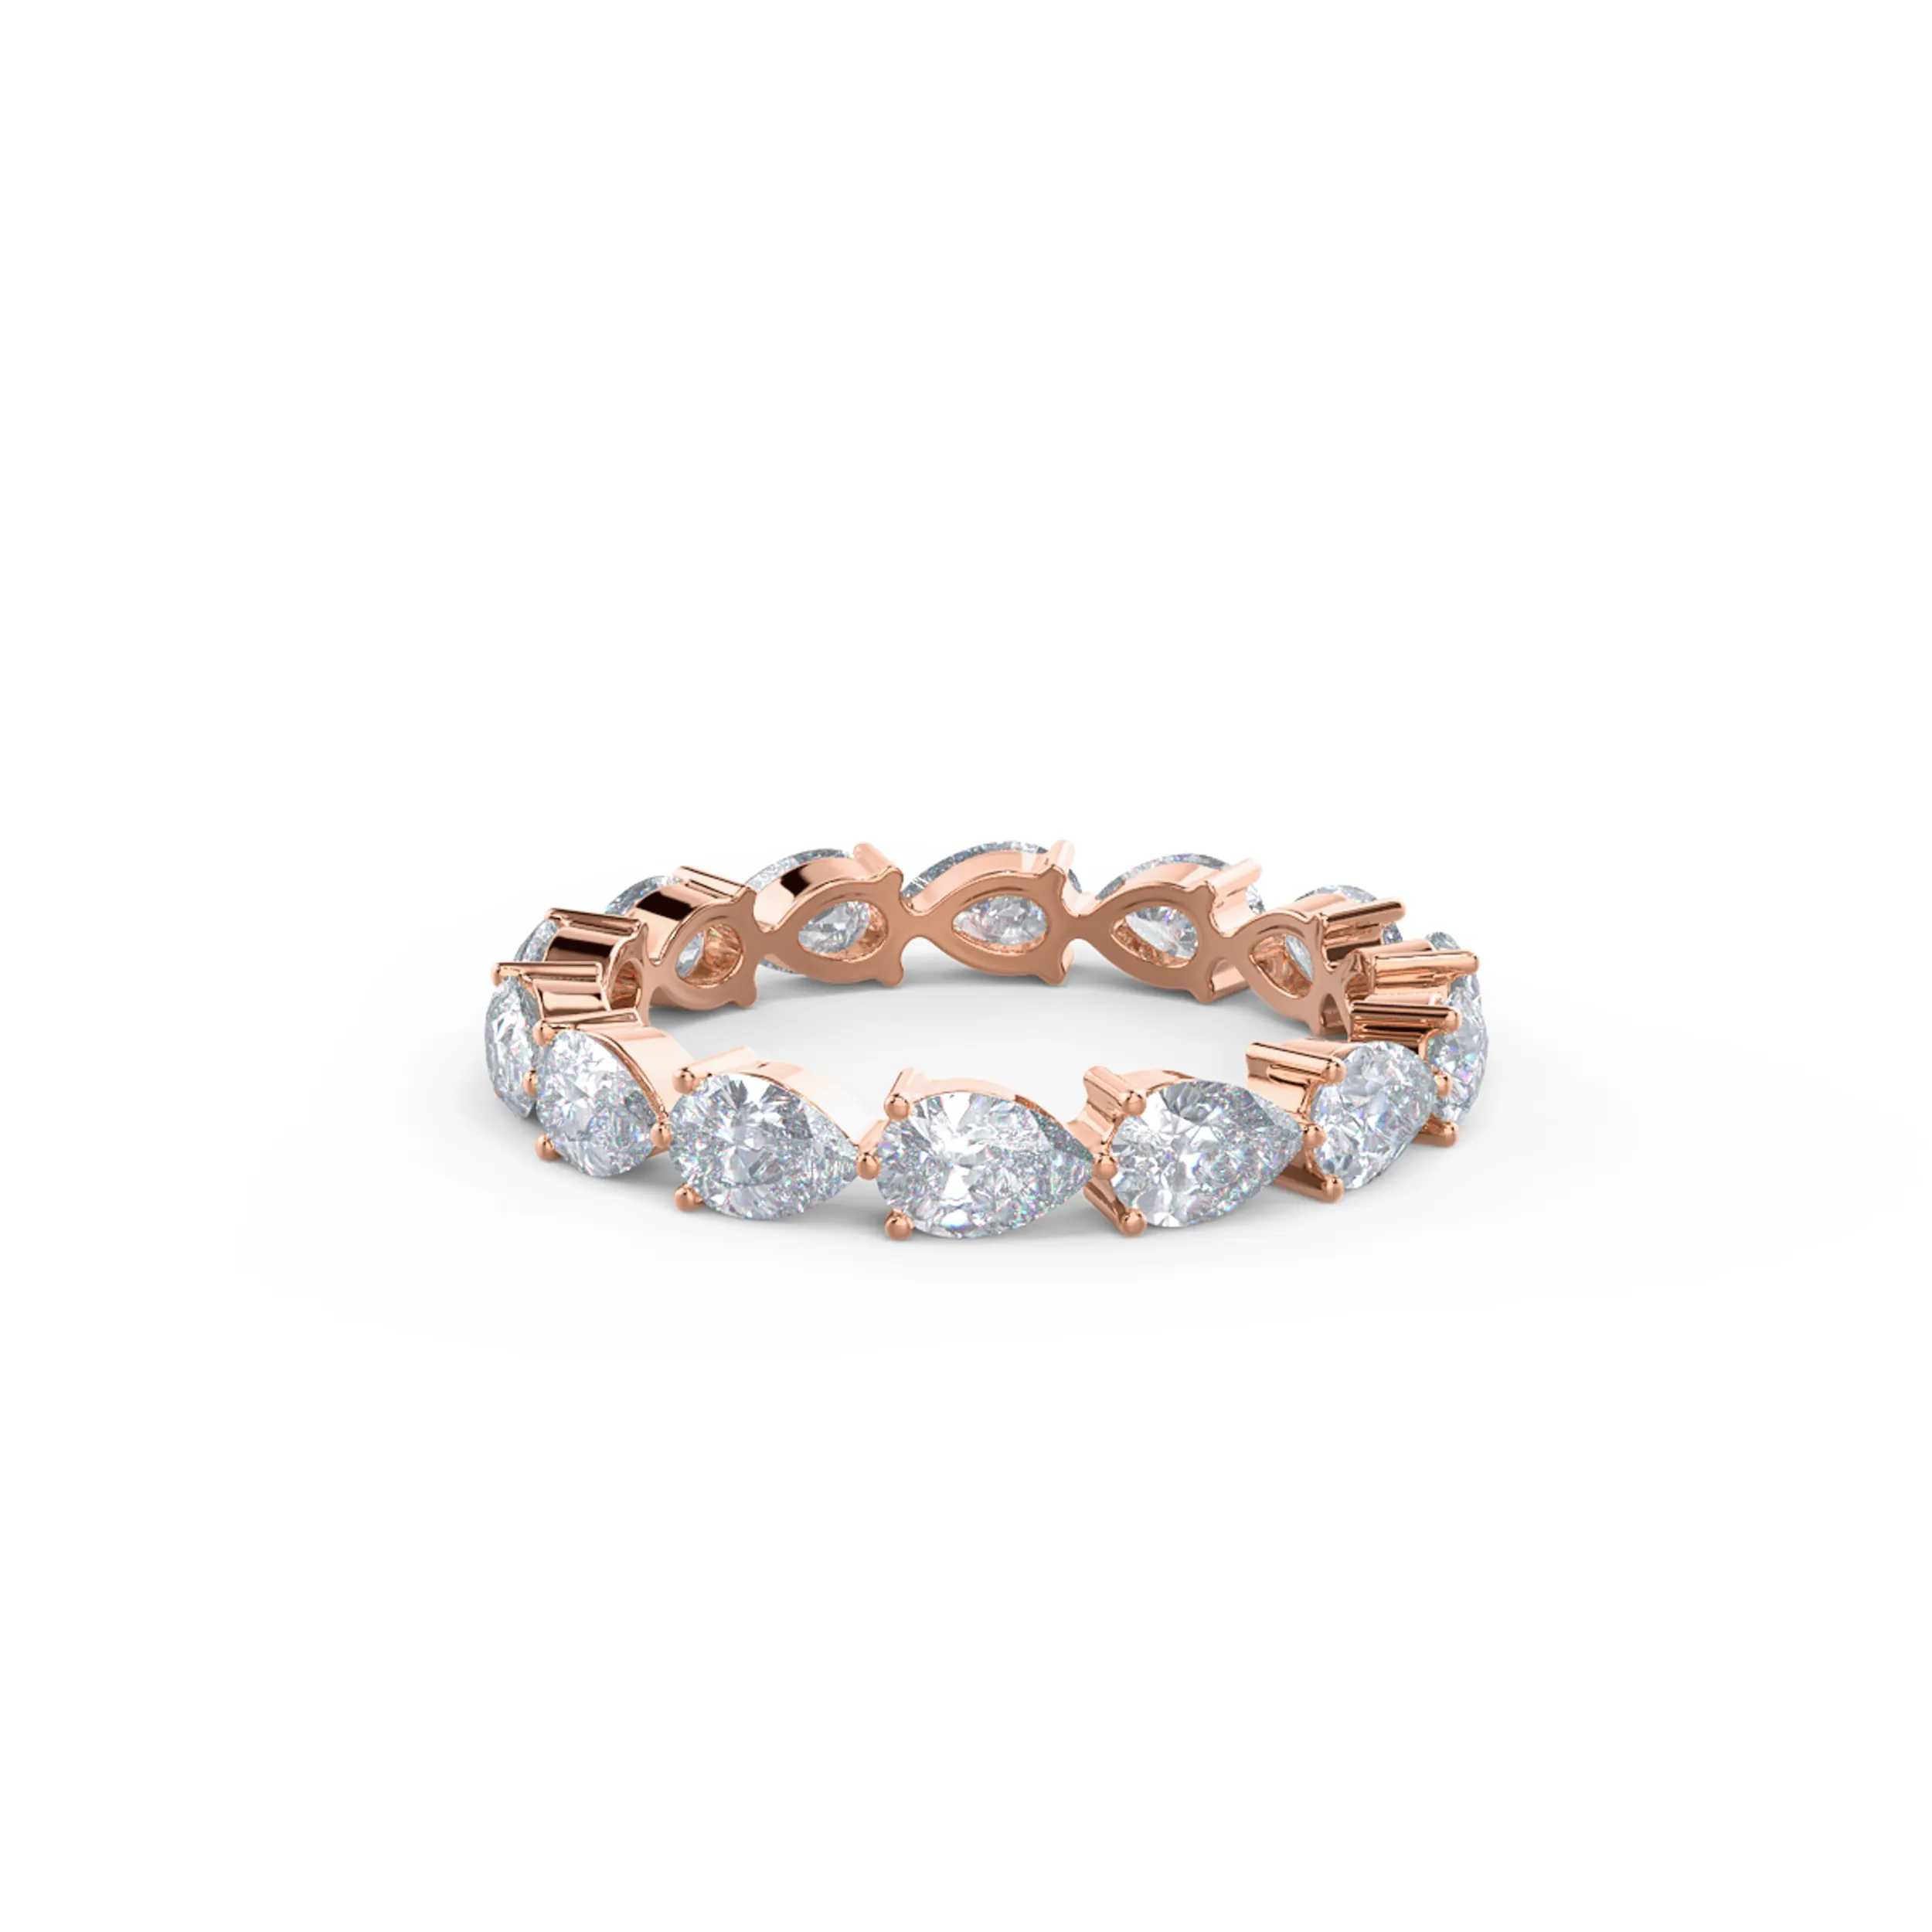 14k Rose Gold Pear East-West Eternity Band featuring 2.0 Carat Diamonds (Main View)